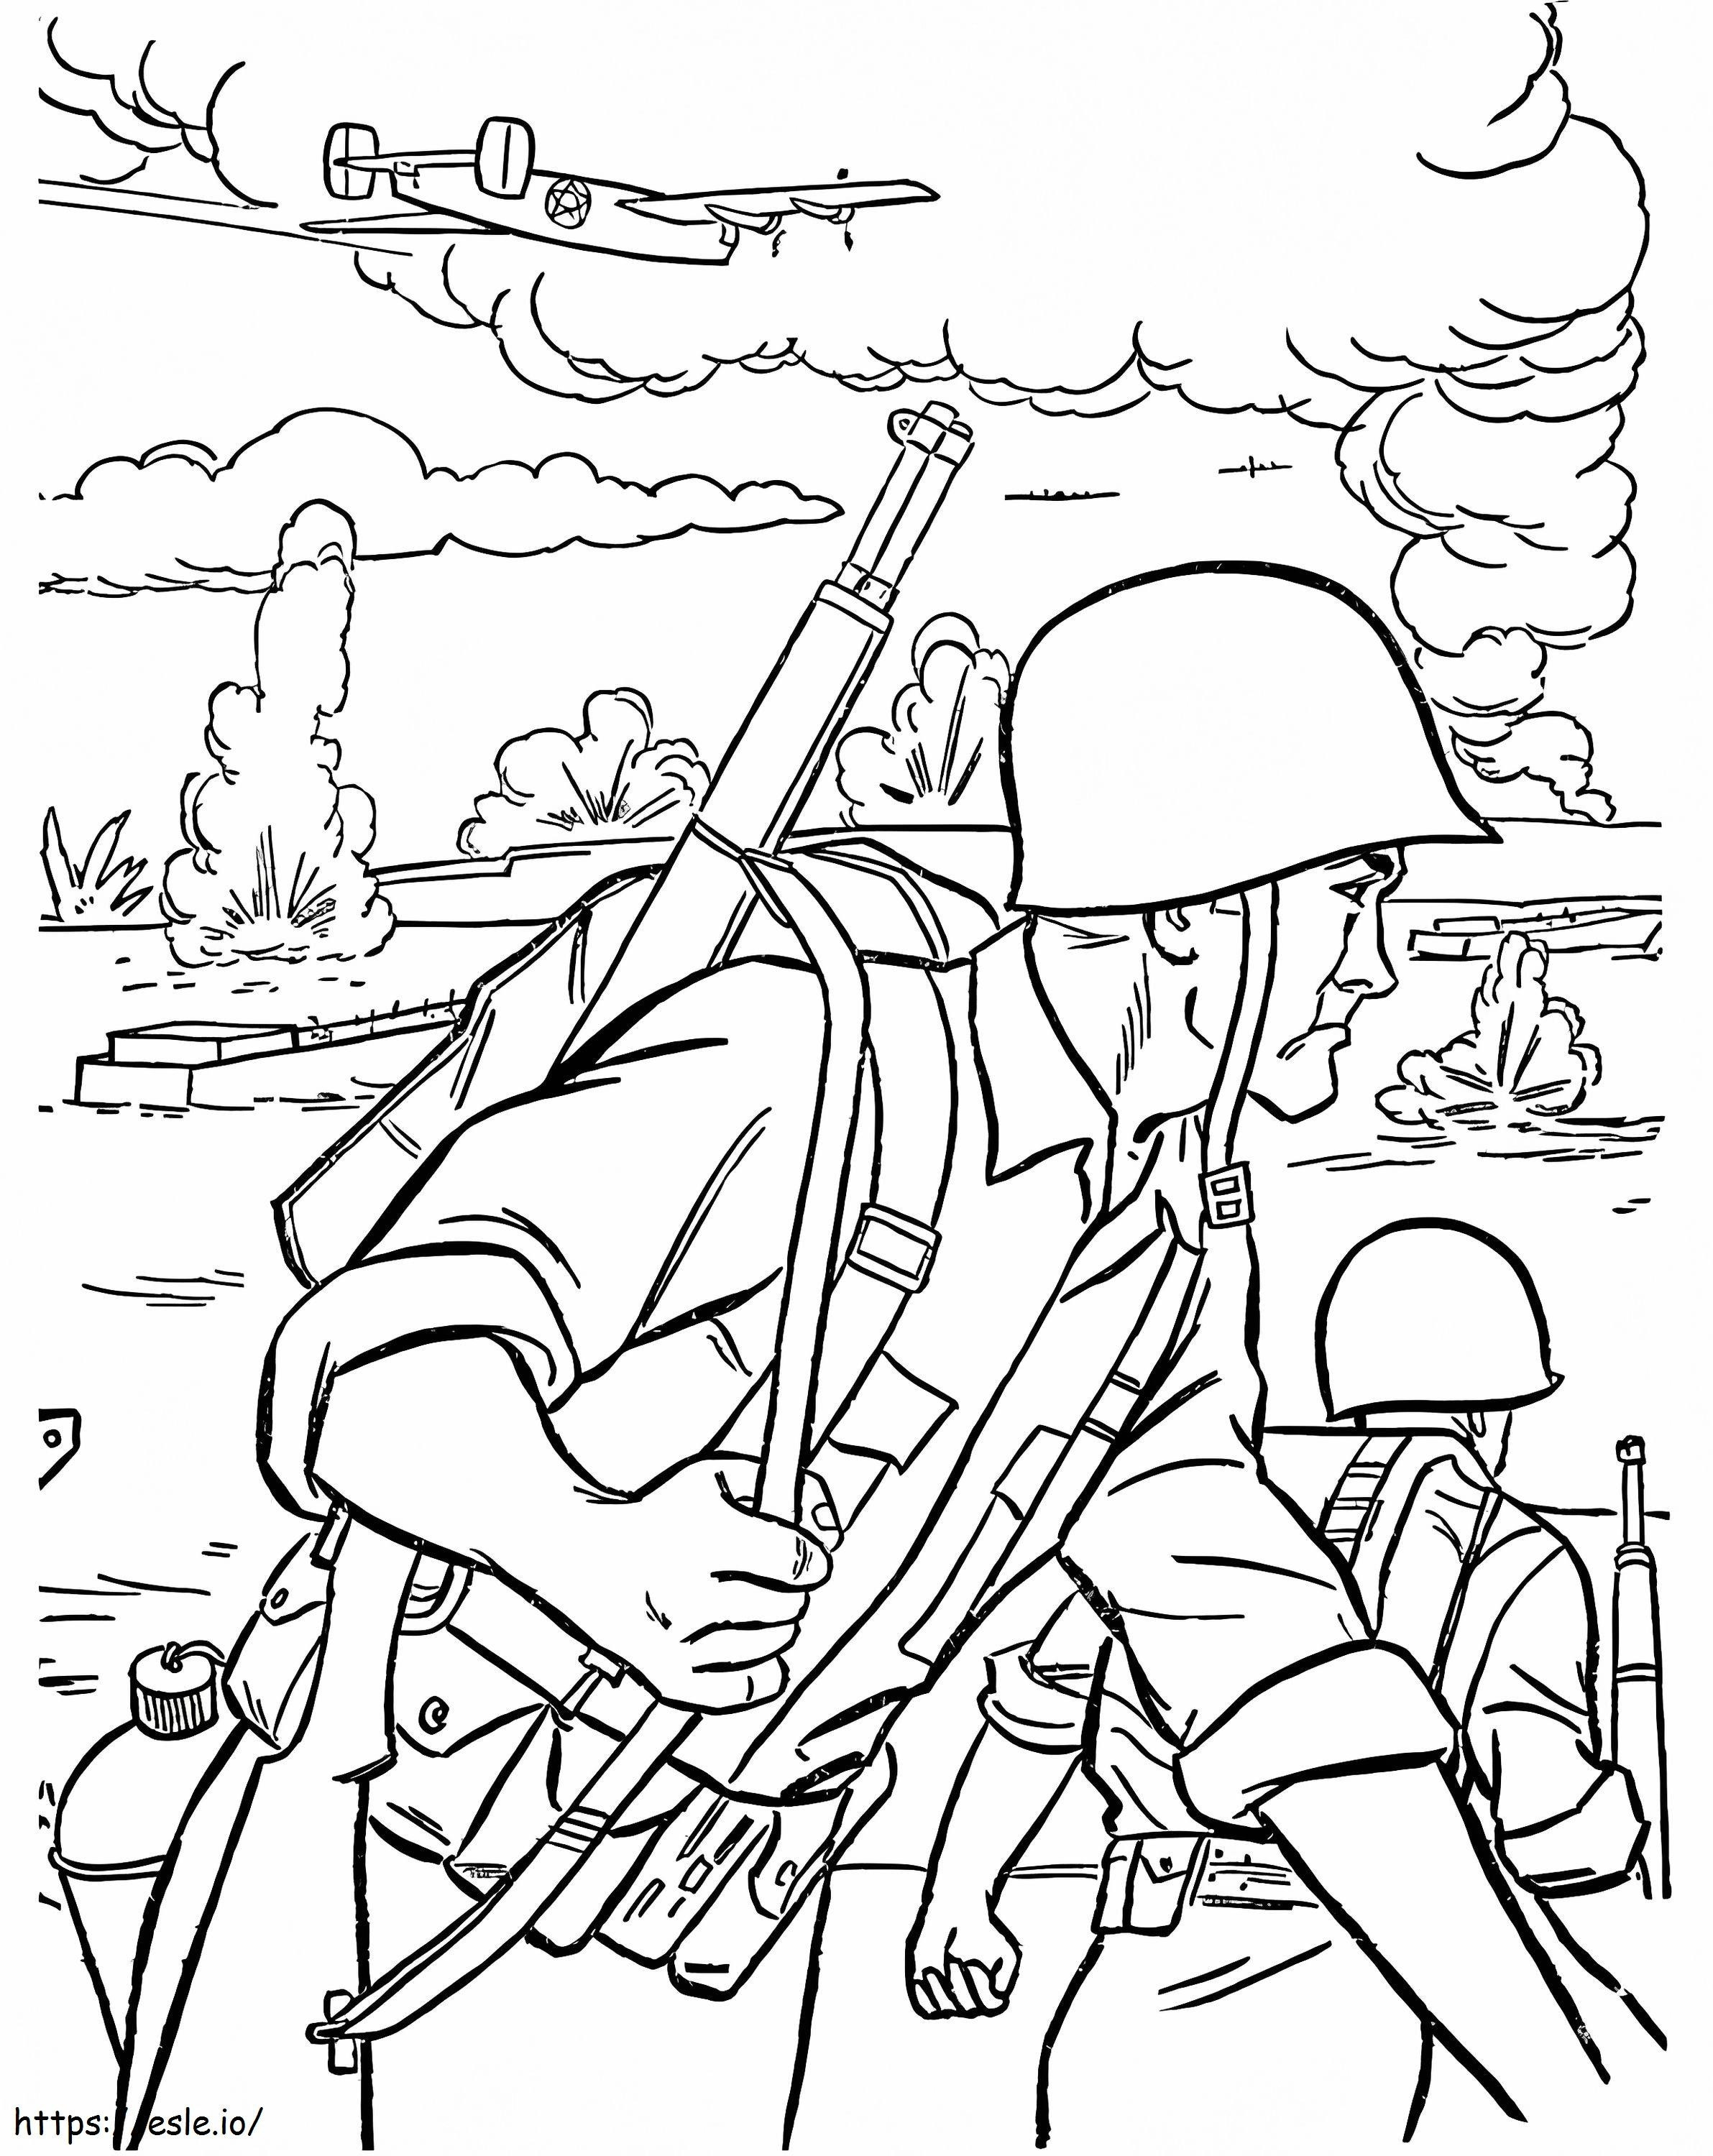 Soldiers On The Battlefield coloring page